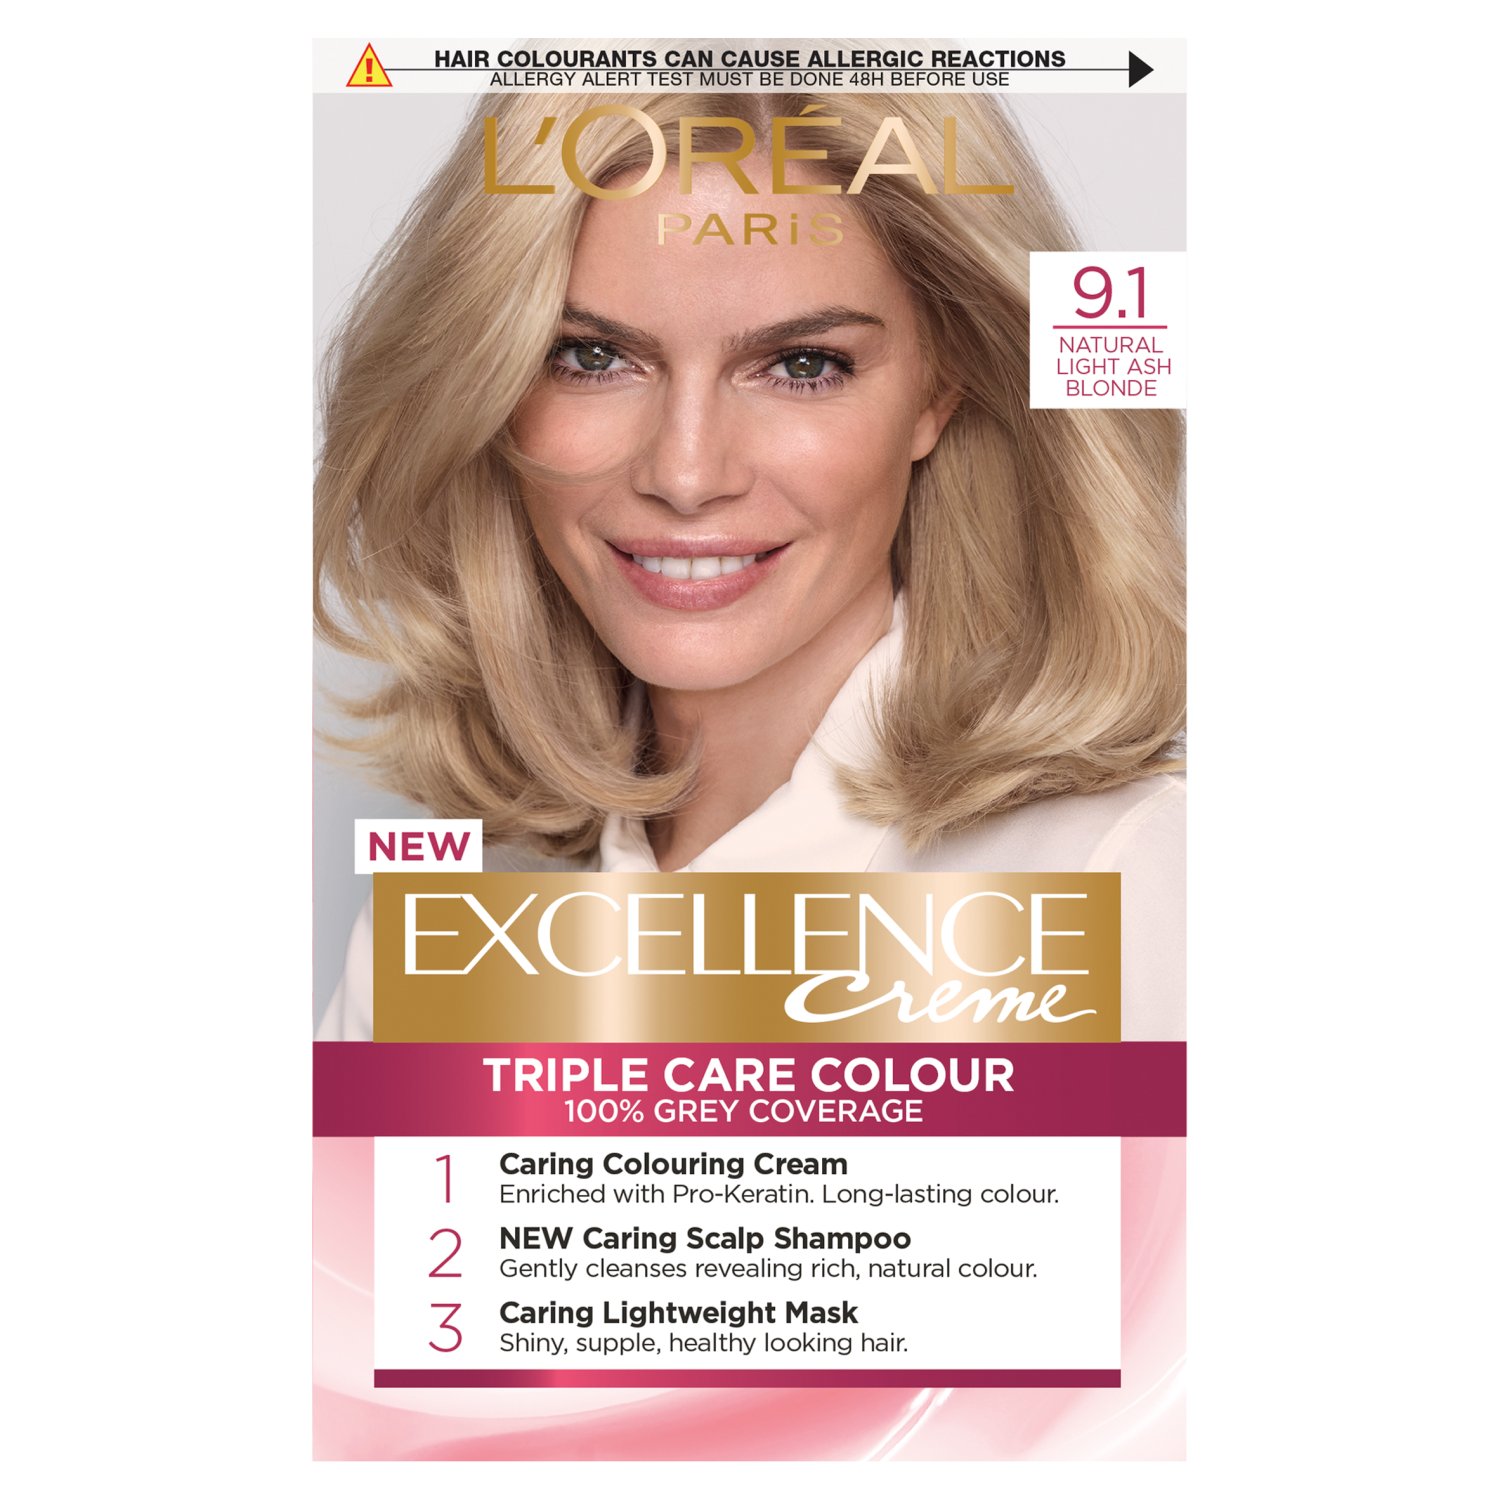 L'Oreal Excellence Creme Gloss Natural Light Blonde Hair Colour (197 g)